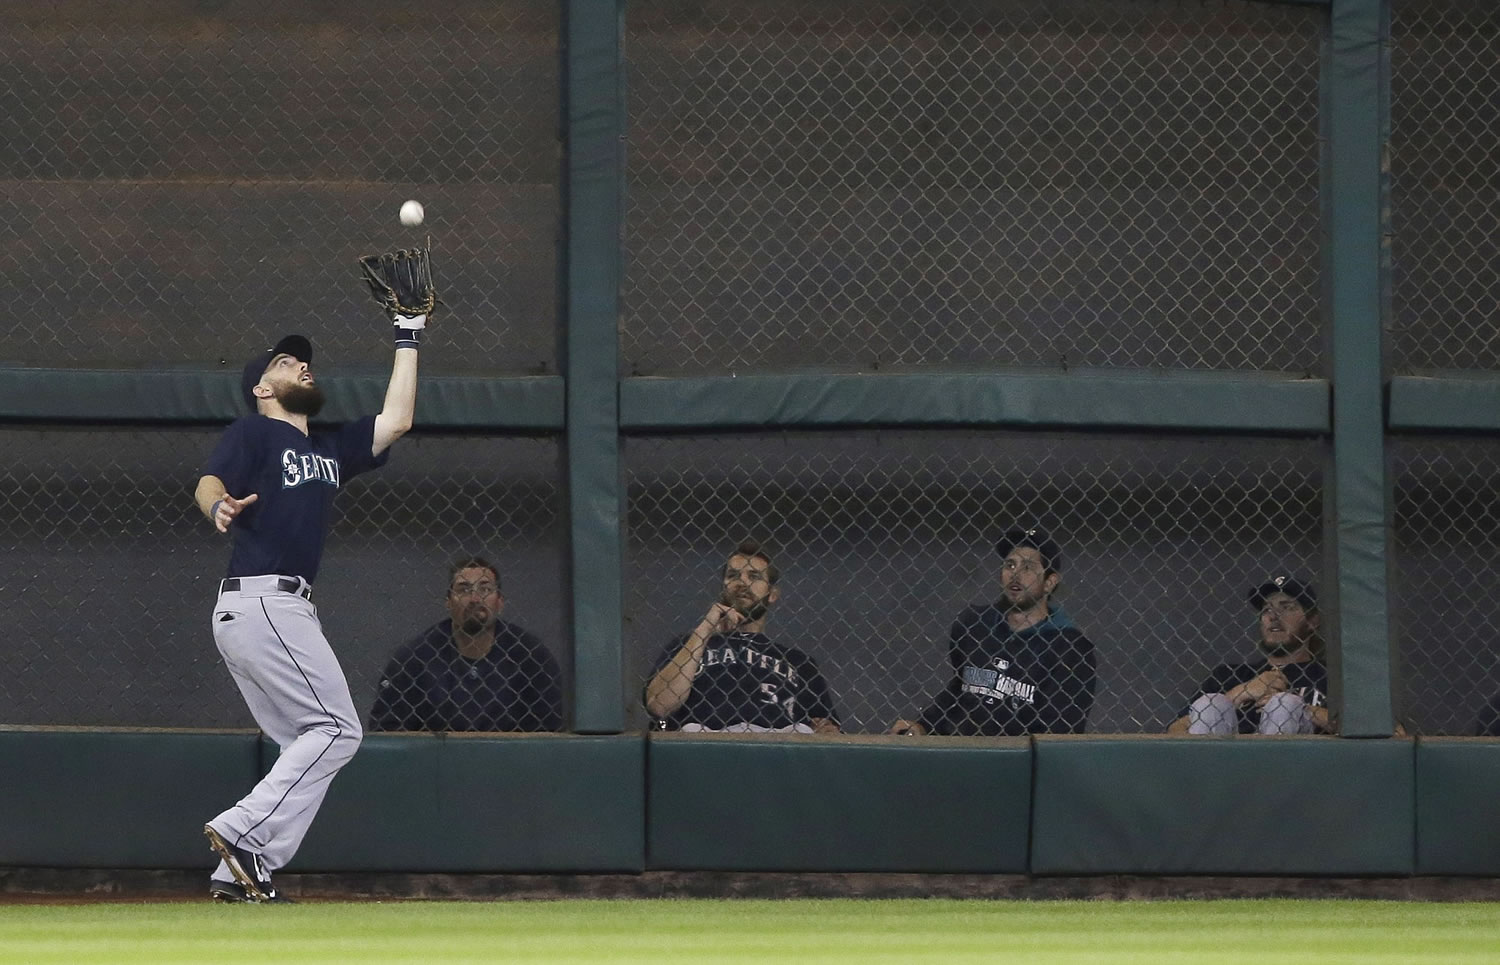 Seattle Mariners left fielder Dustin Ackley makes a catch in front of the bullpen for an out on Houston Astros' Jason Castro in the fourth inning Tuesday in Houston.